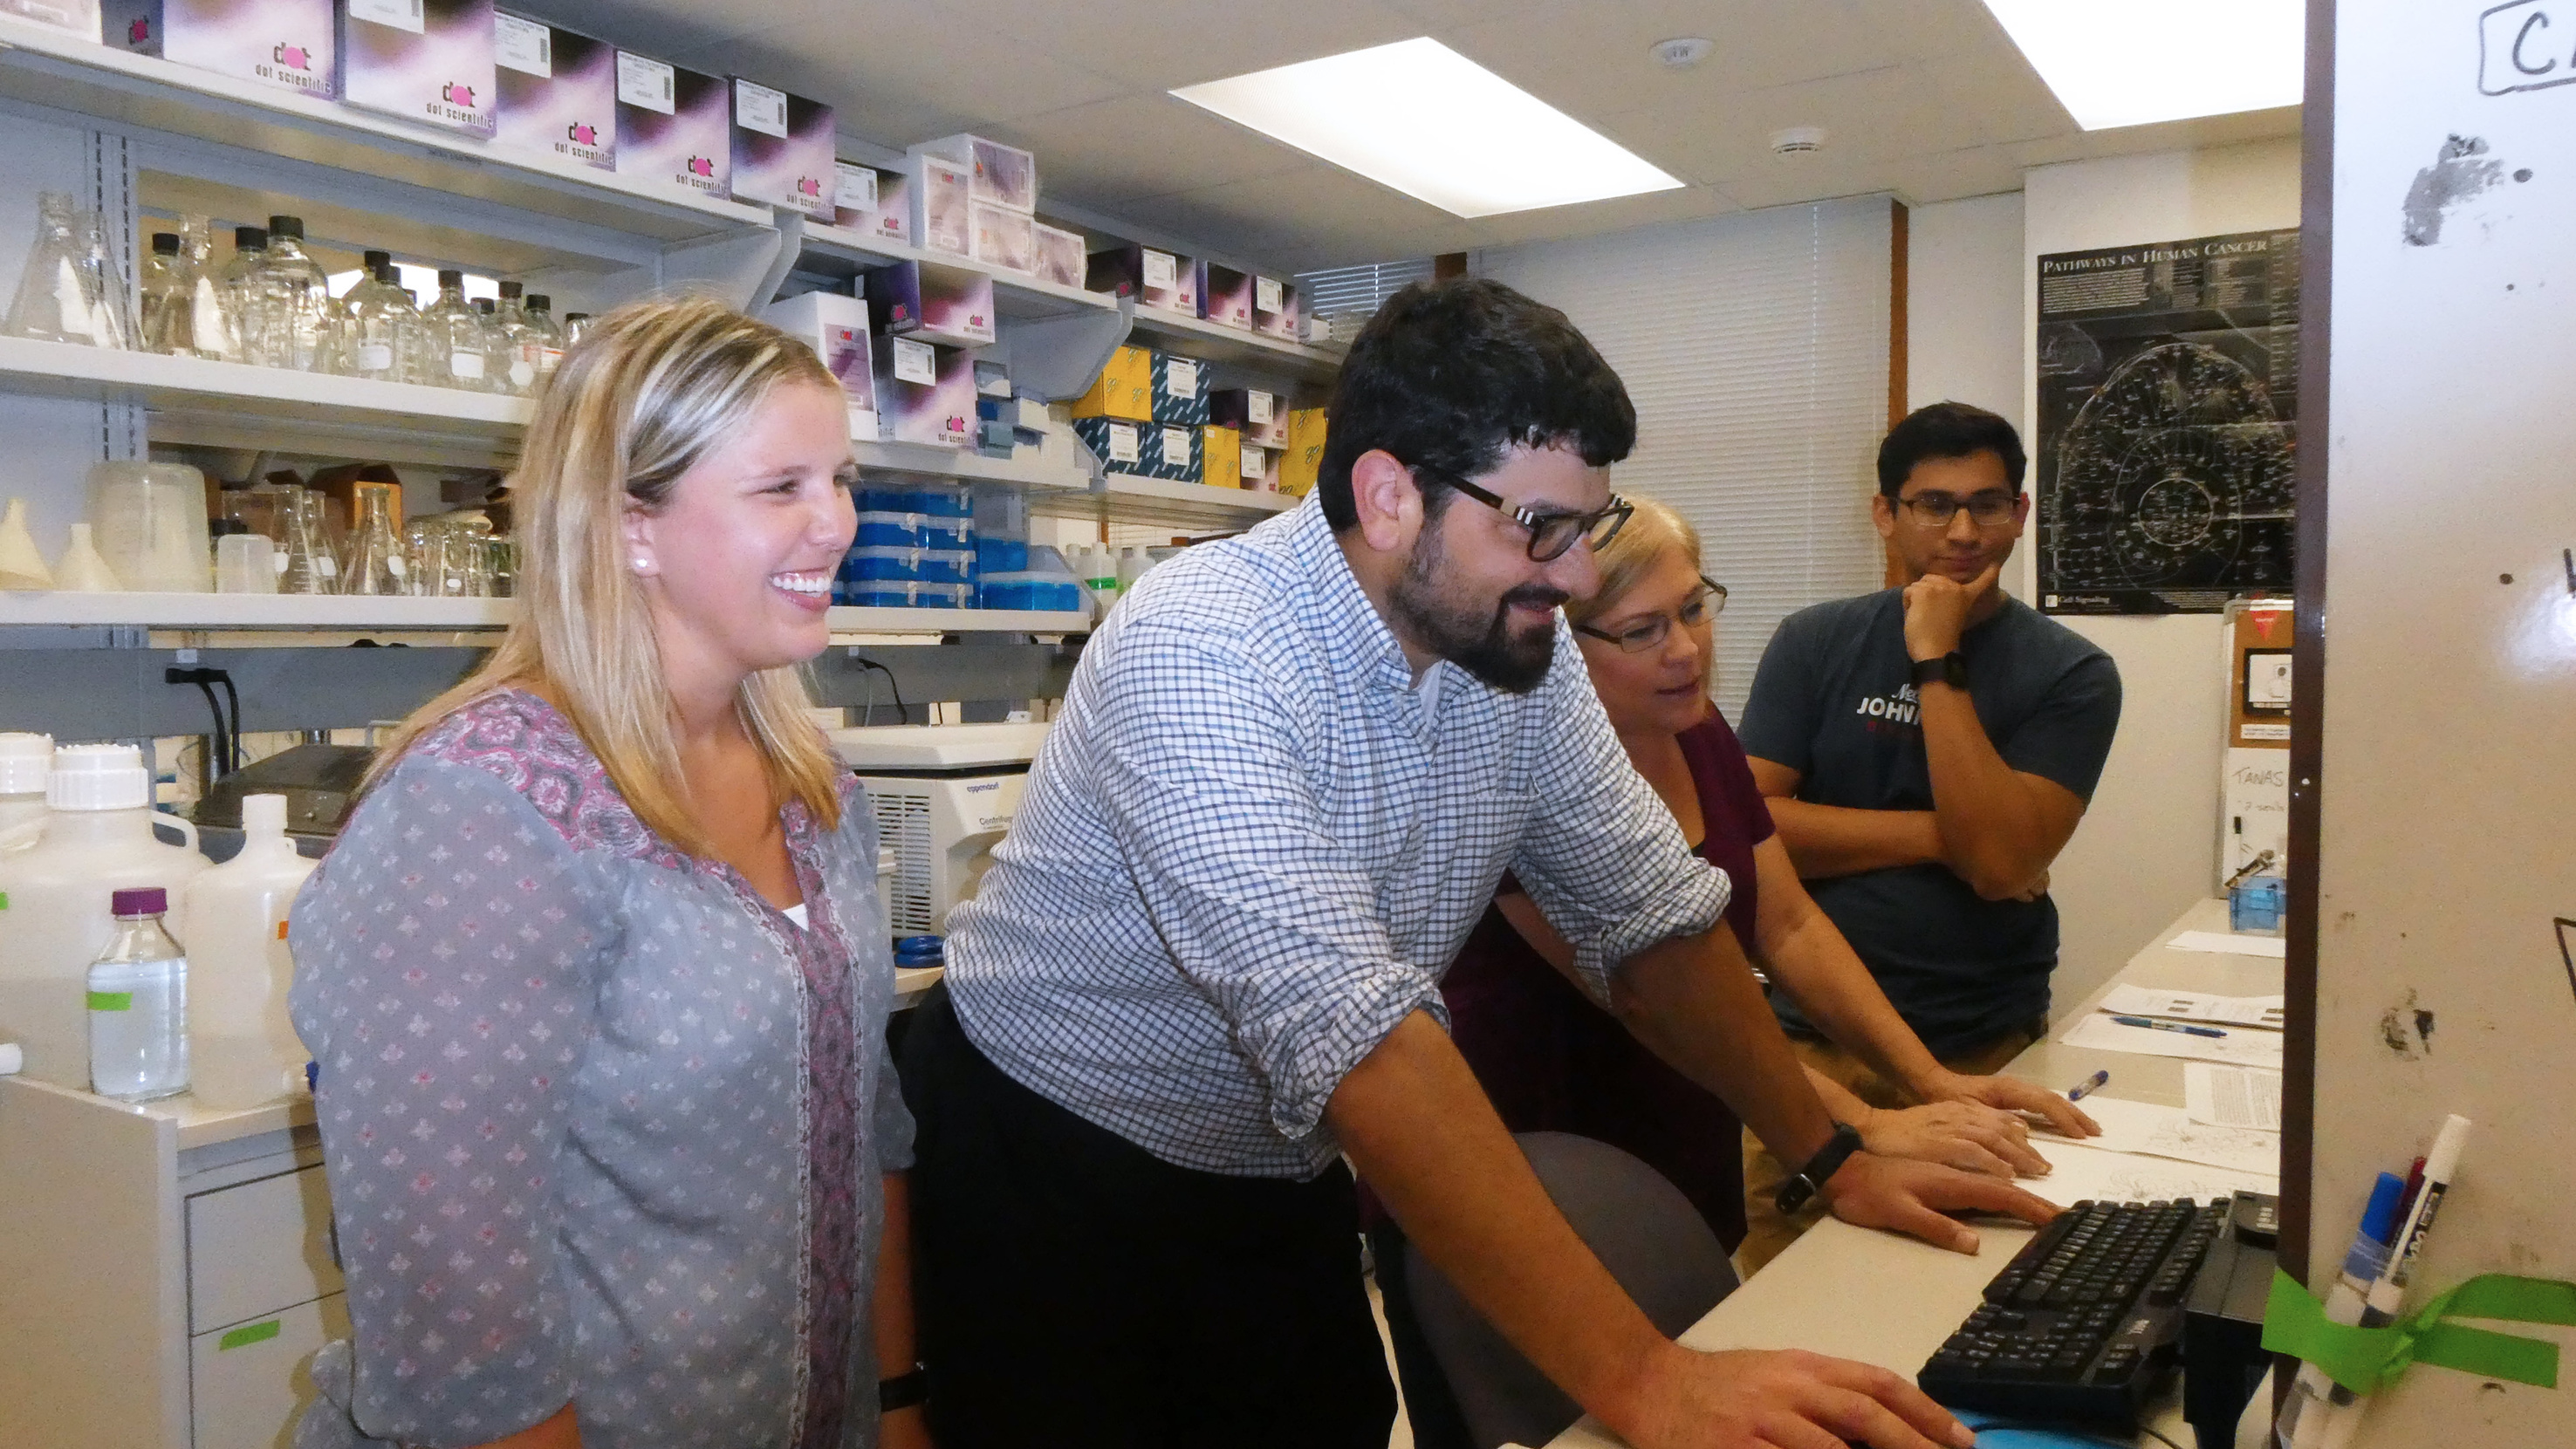 Dr. Tanas and lab members looking at a computer screen and smiling